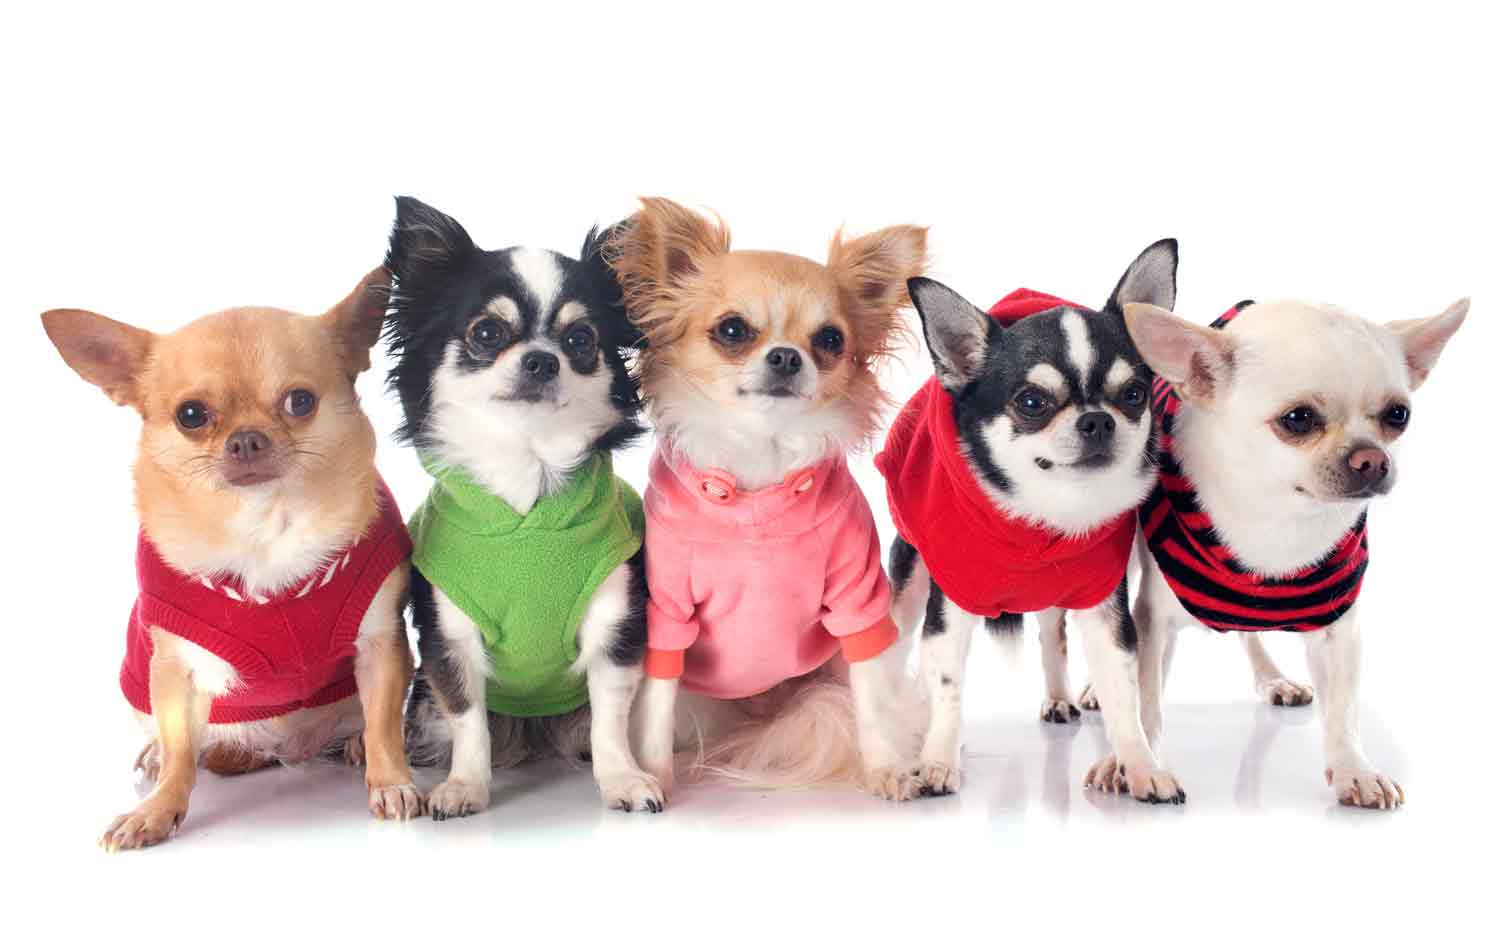 Dog clothing for all breeds